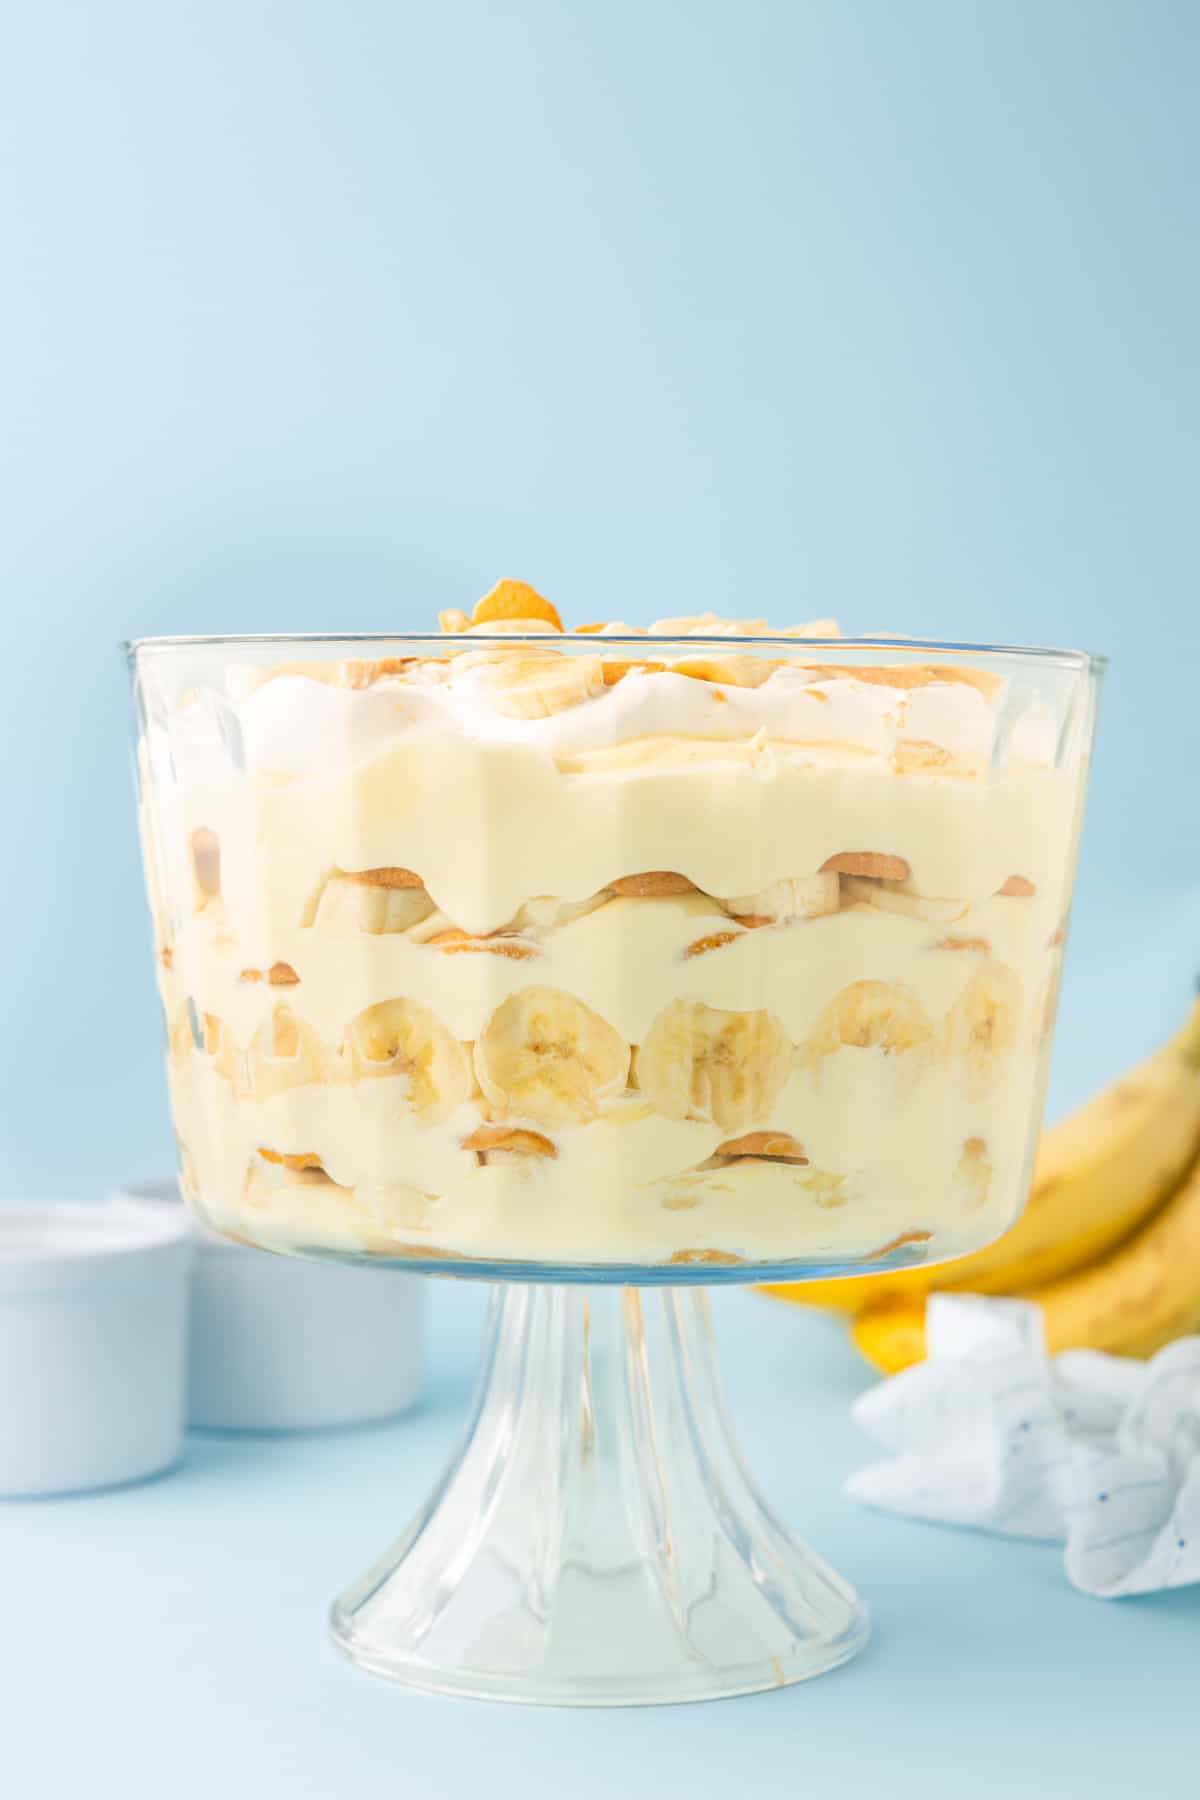 trifle dish with banana pudding layered inside of it against a blue background